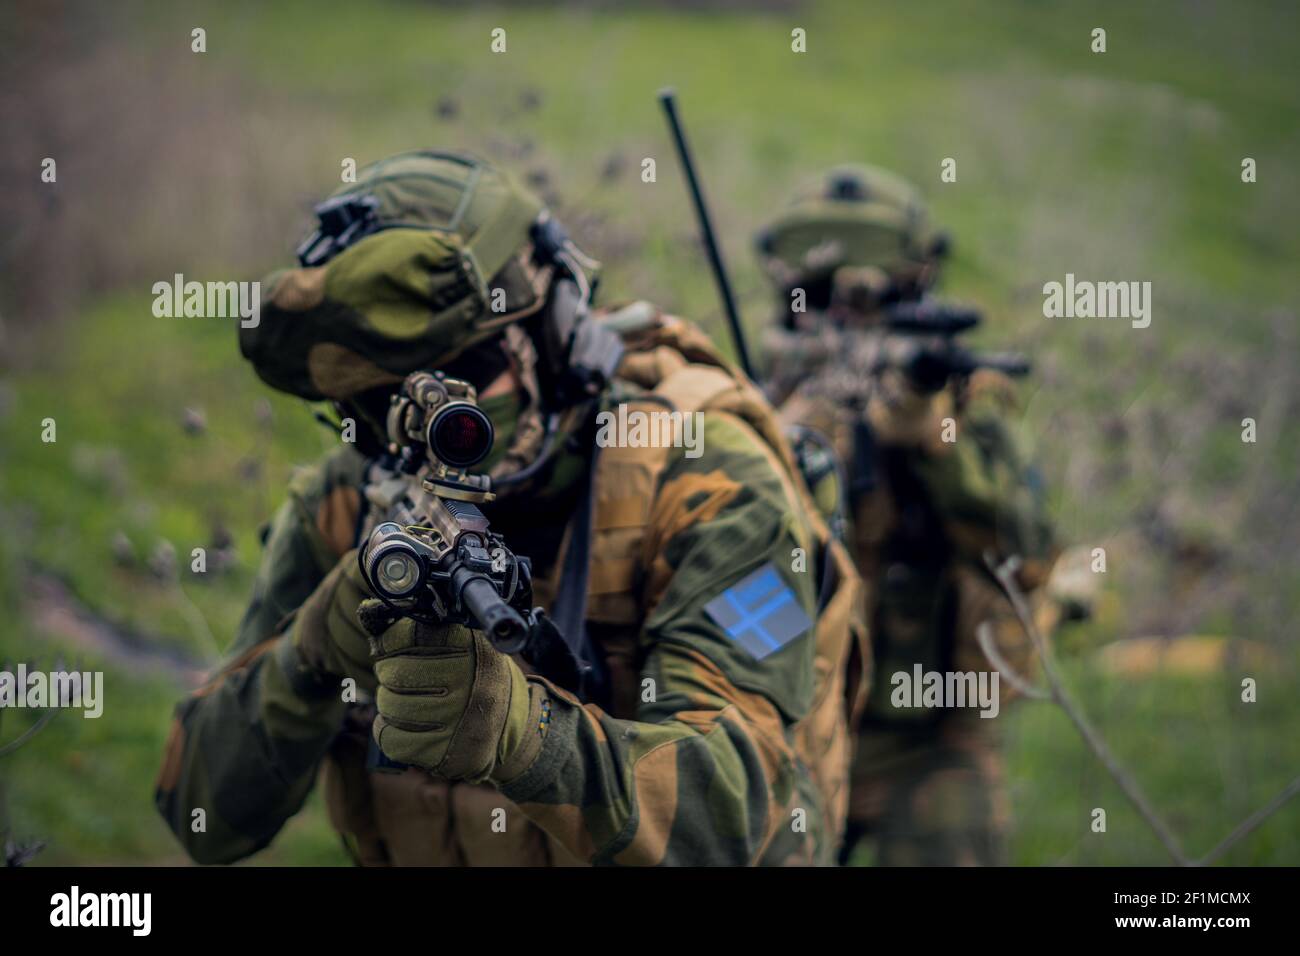 An assault rifle in the hands of the aiming special forces soldier Stock Photo